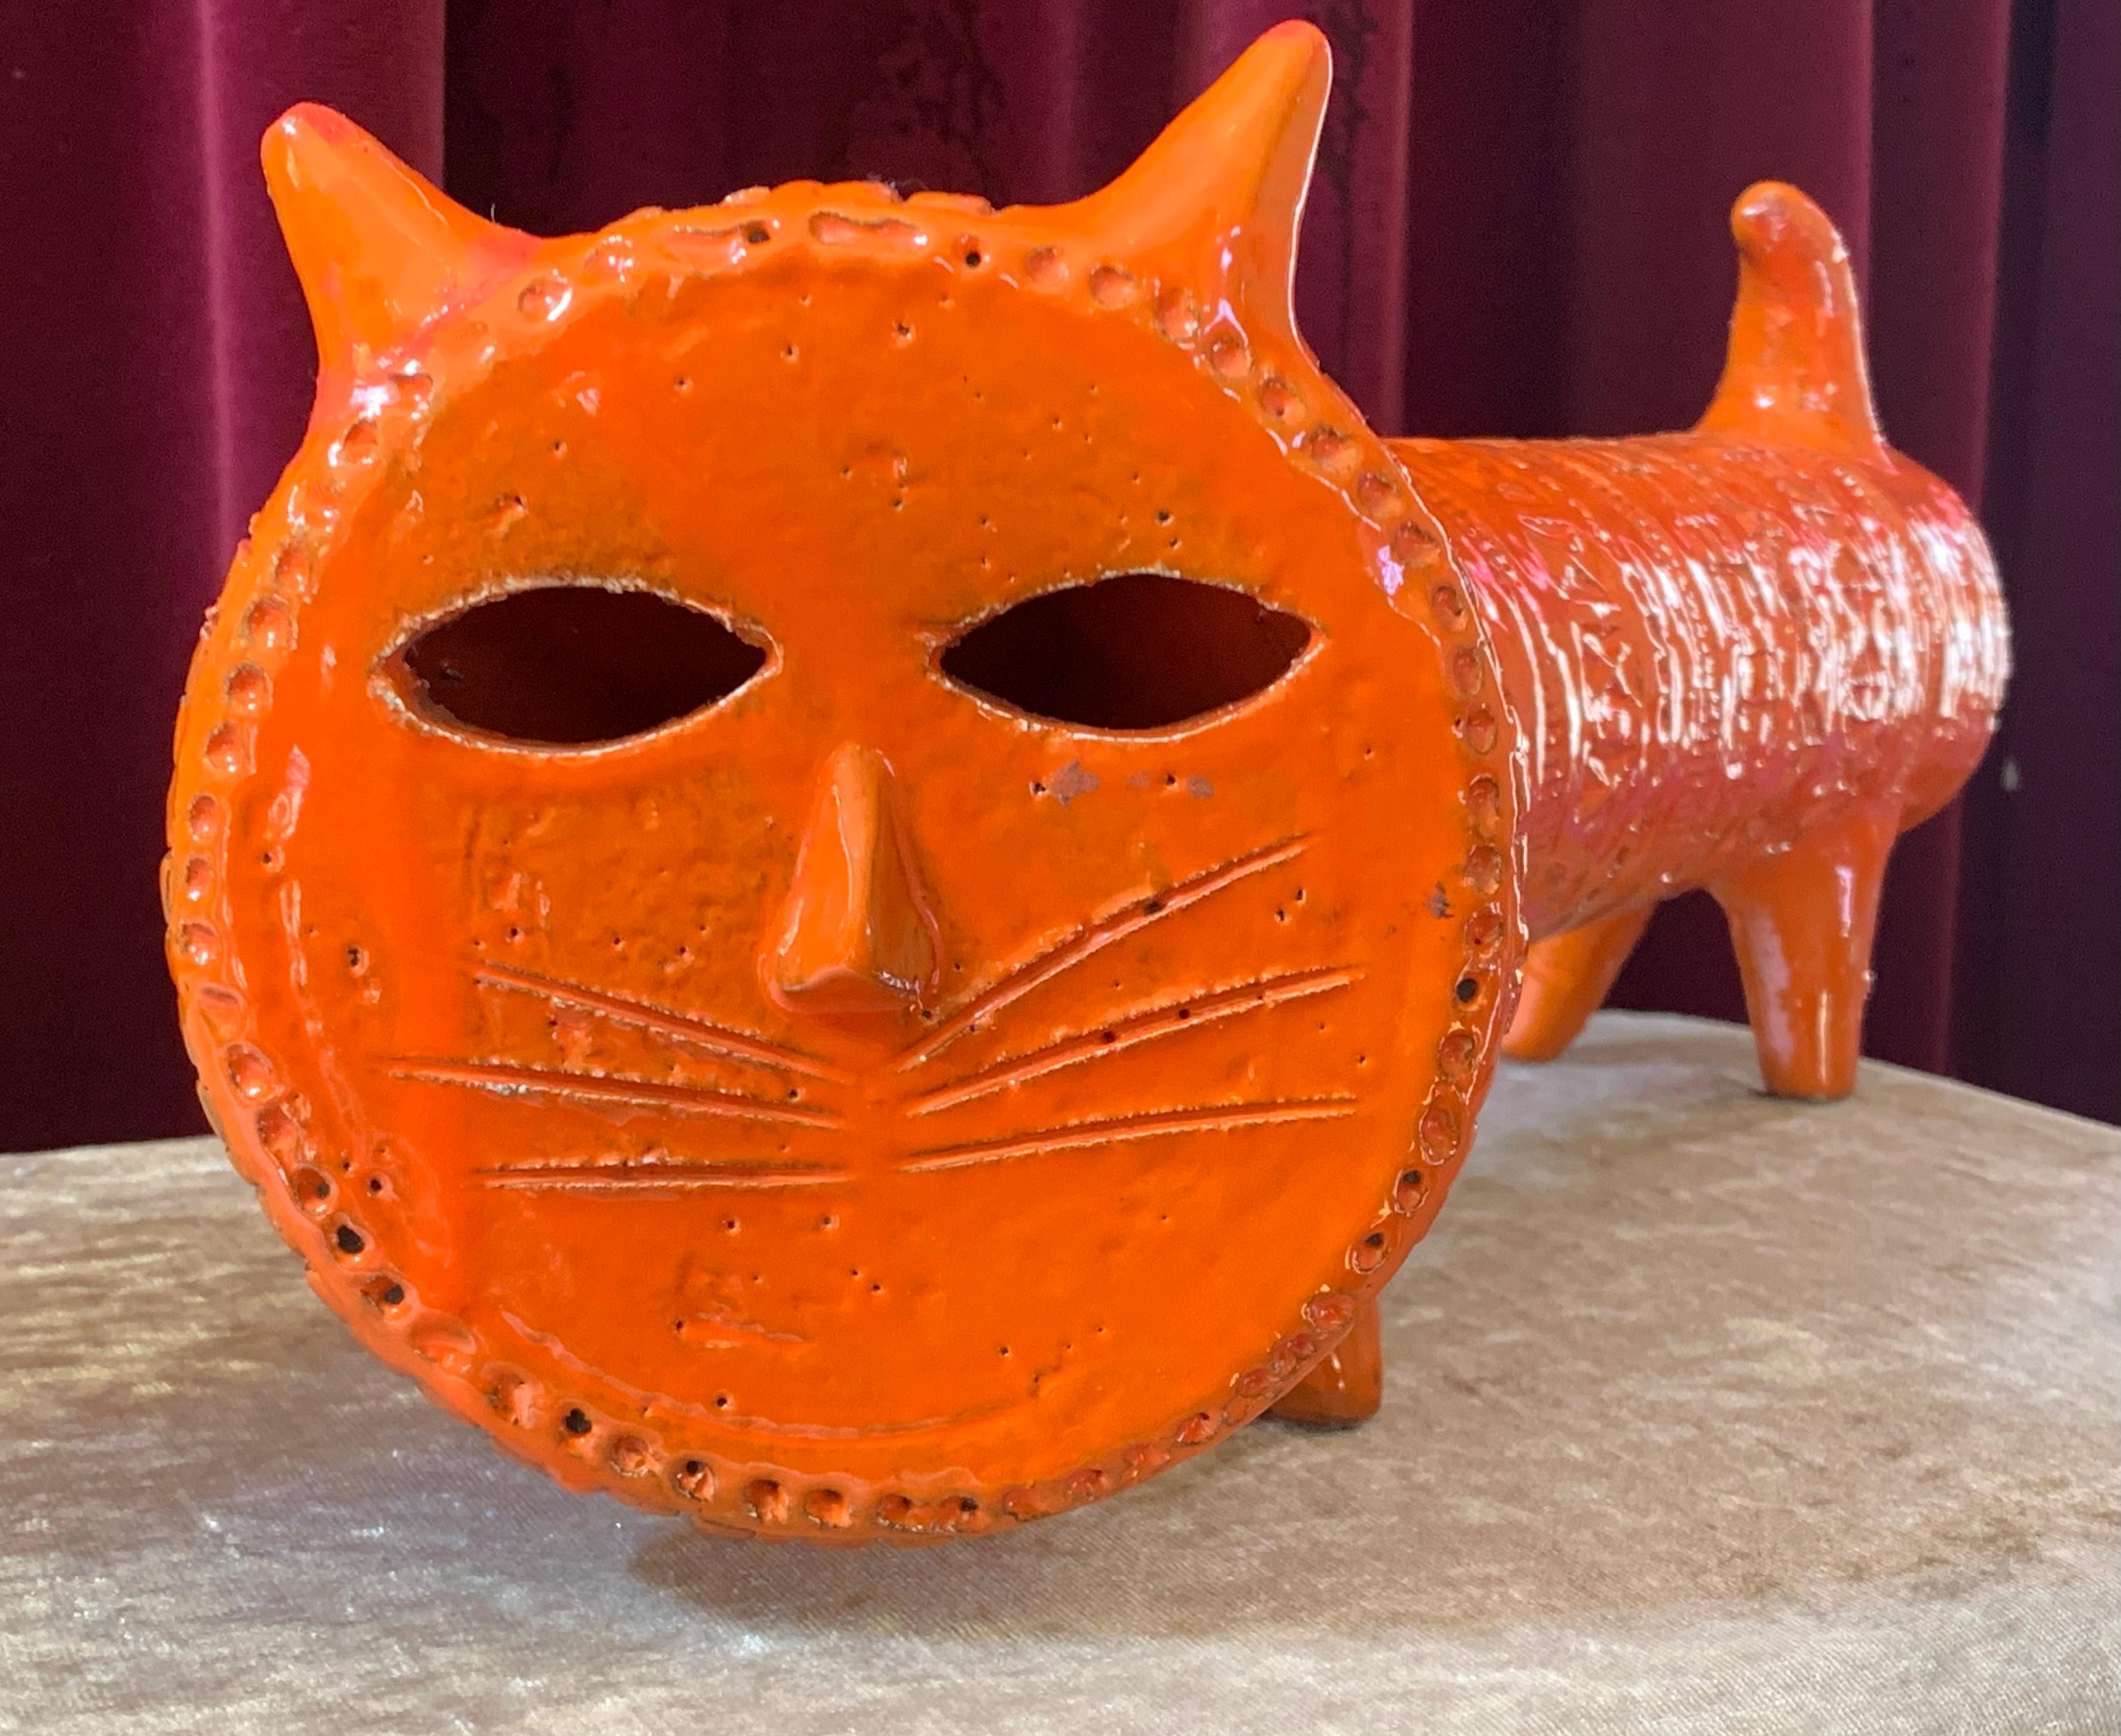 Hard to find brilliant orange glaze on this very rare item with the Rimini design stamped into the body.
One of Aldo Londi’s most desirable animals in beautiful condition.
Marked underneath, Italy with pattern number.